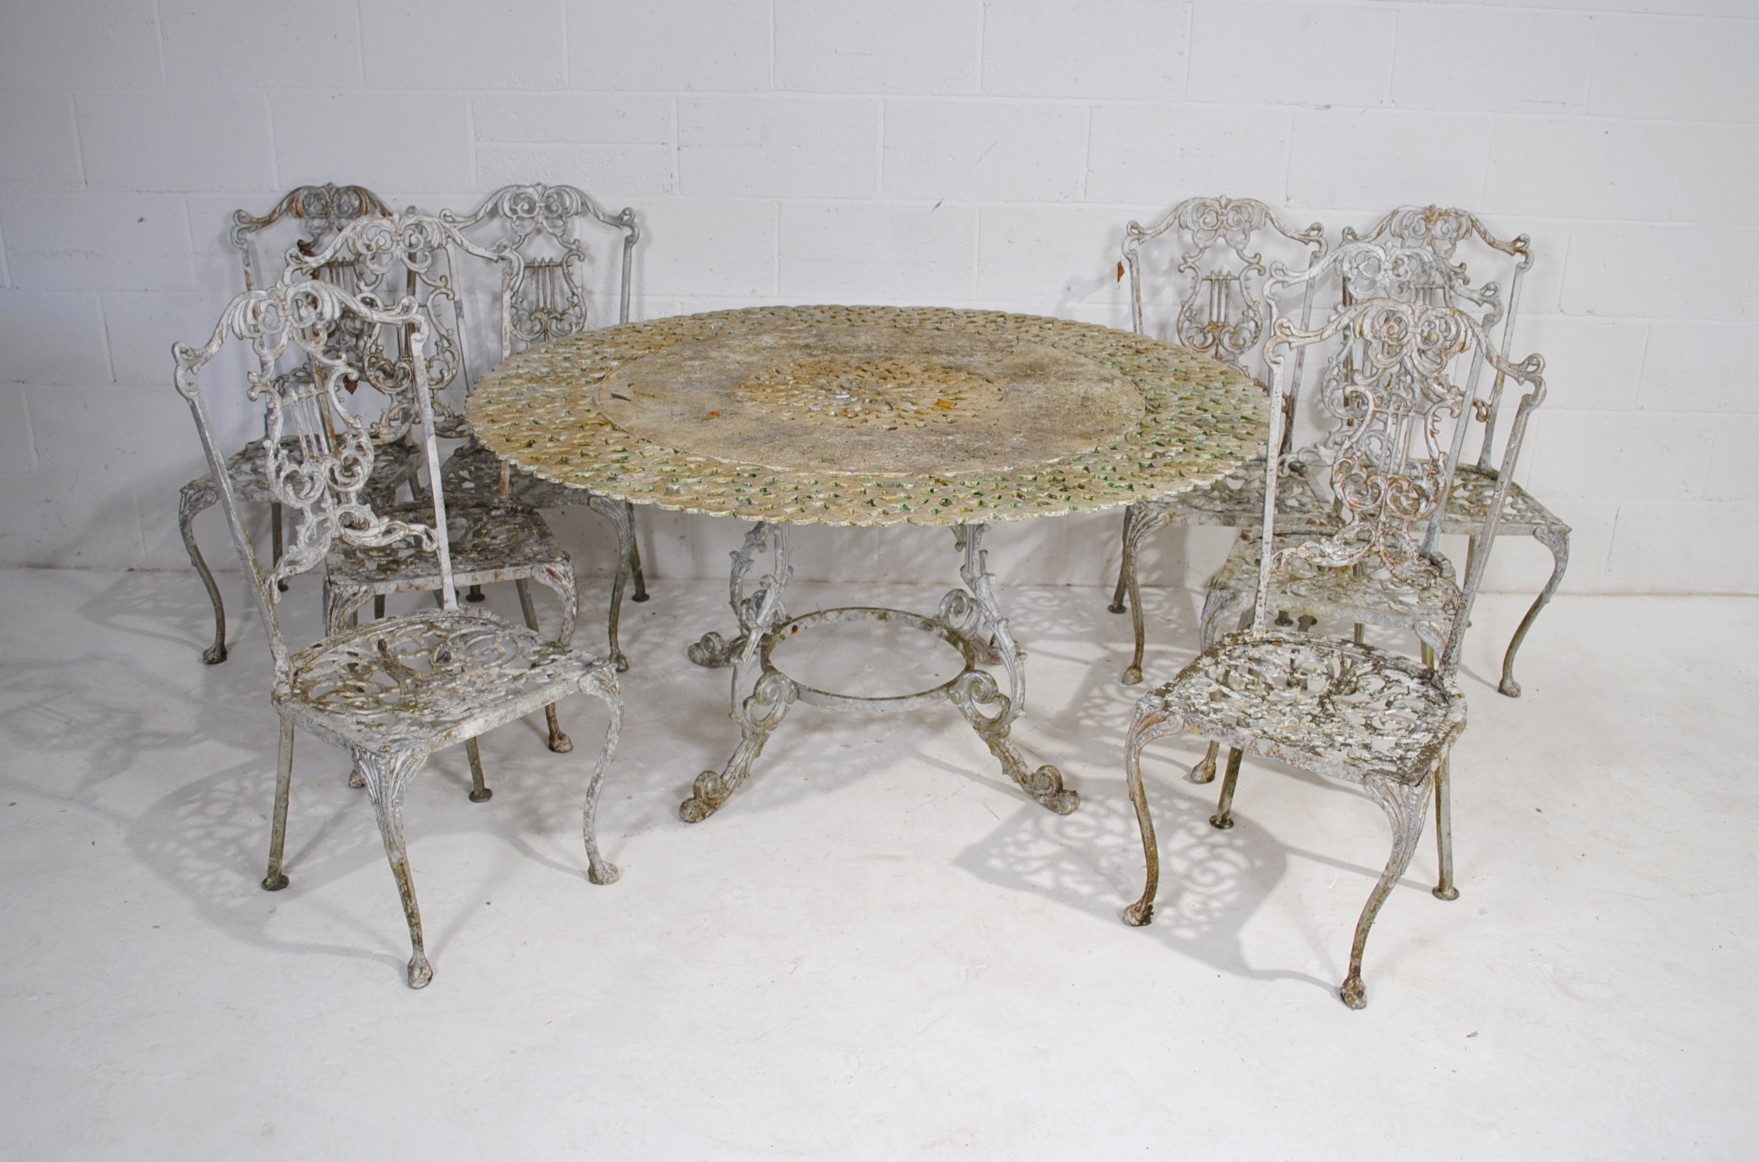 A weathered cast aluminium circular garden table with a set of eight chairs, with lyre backs - one